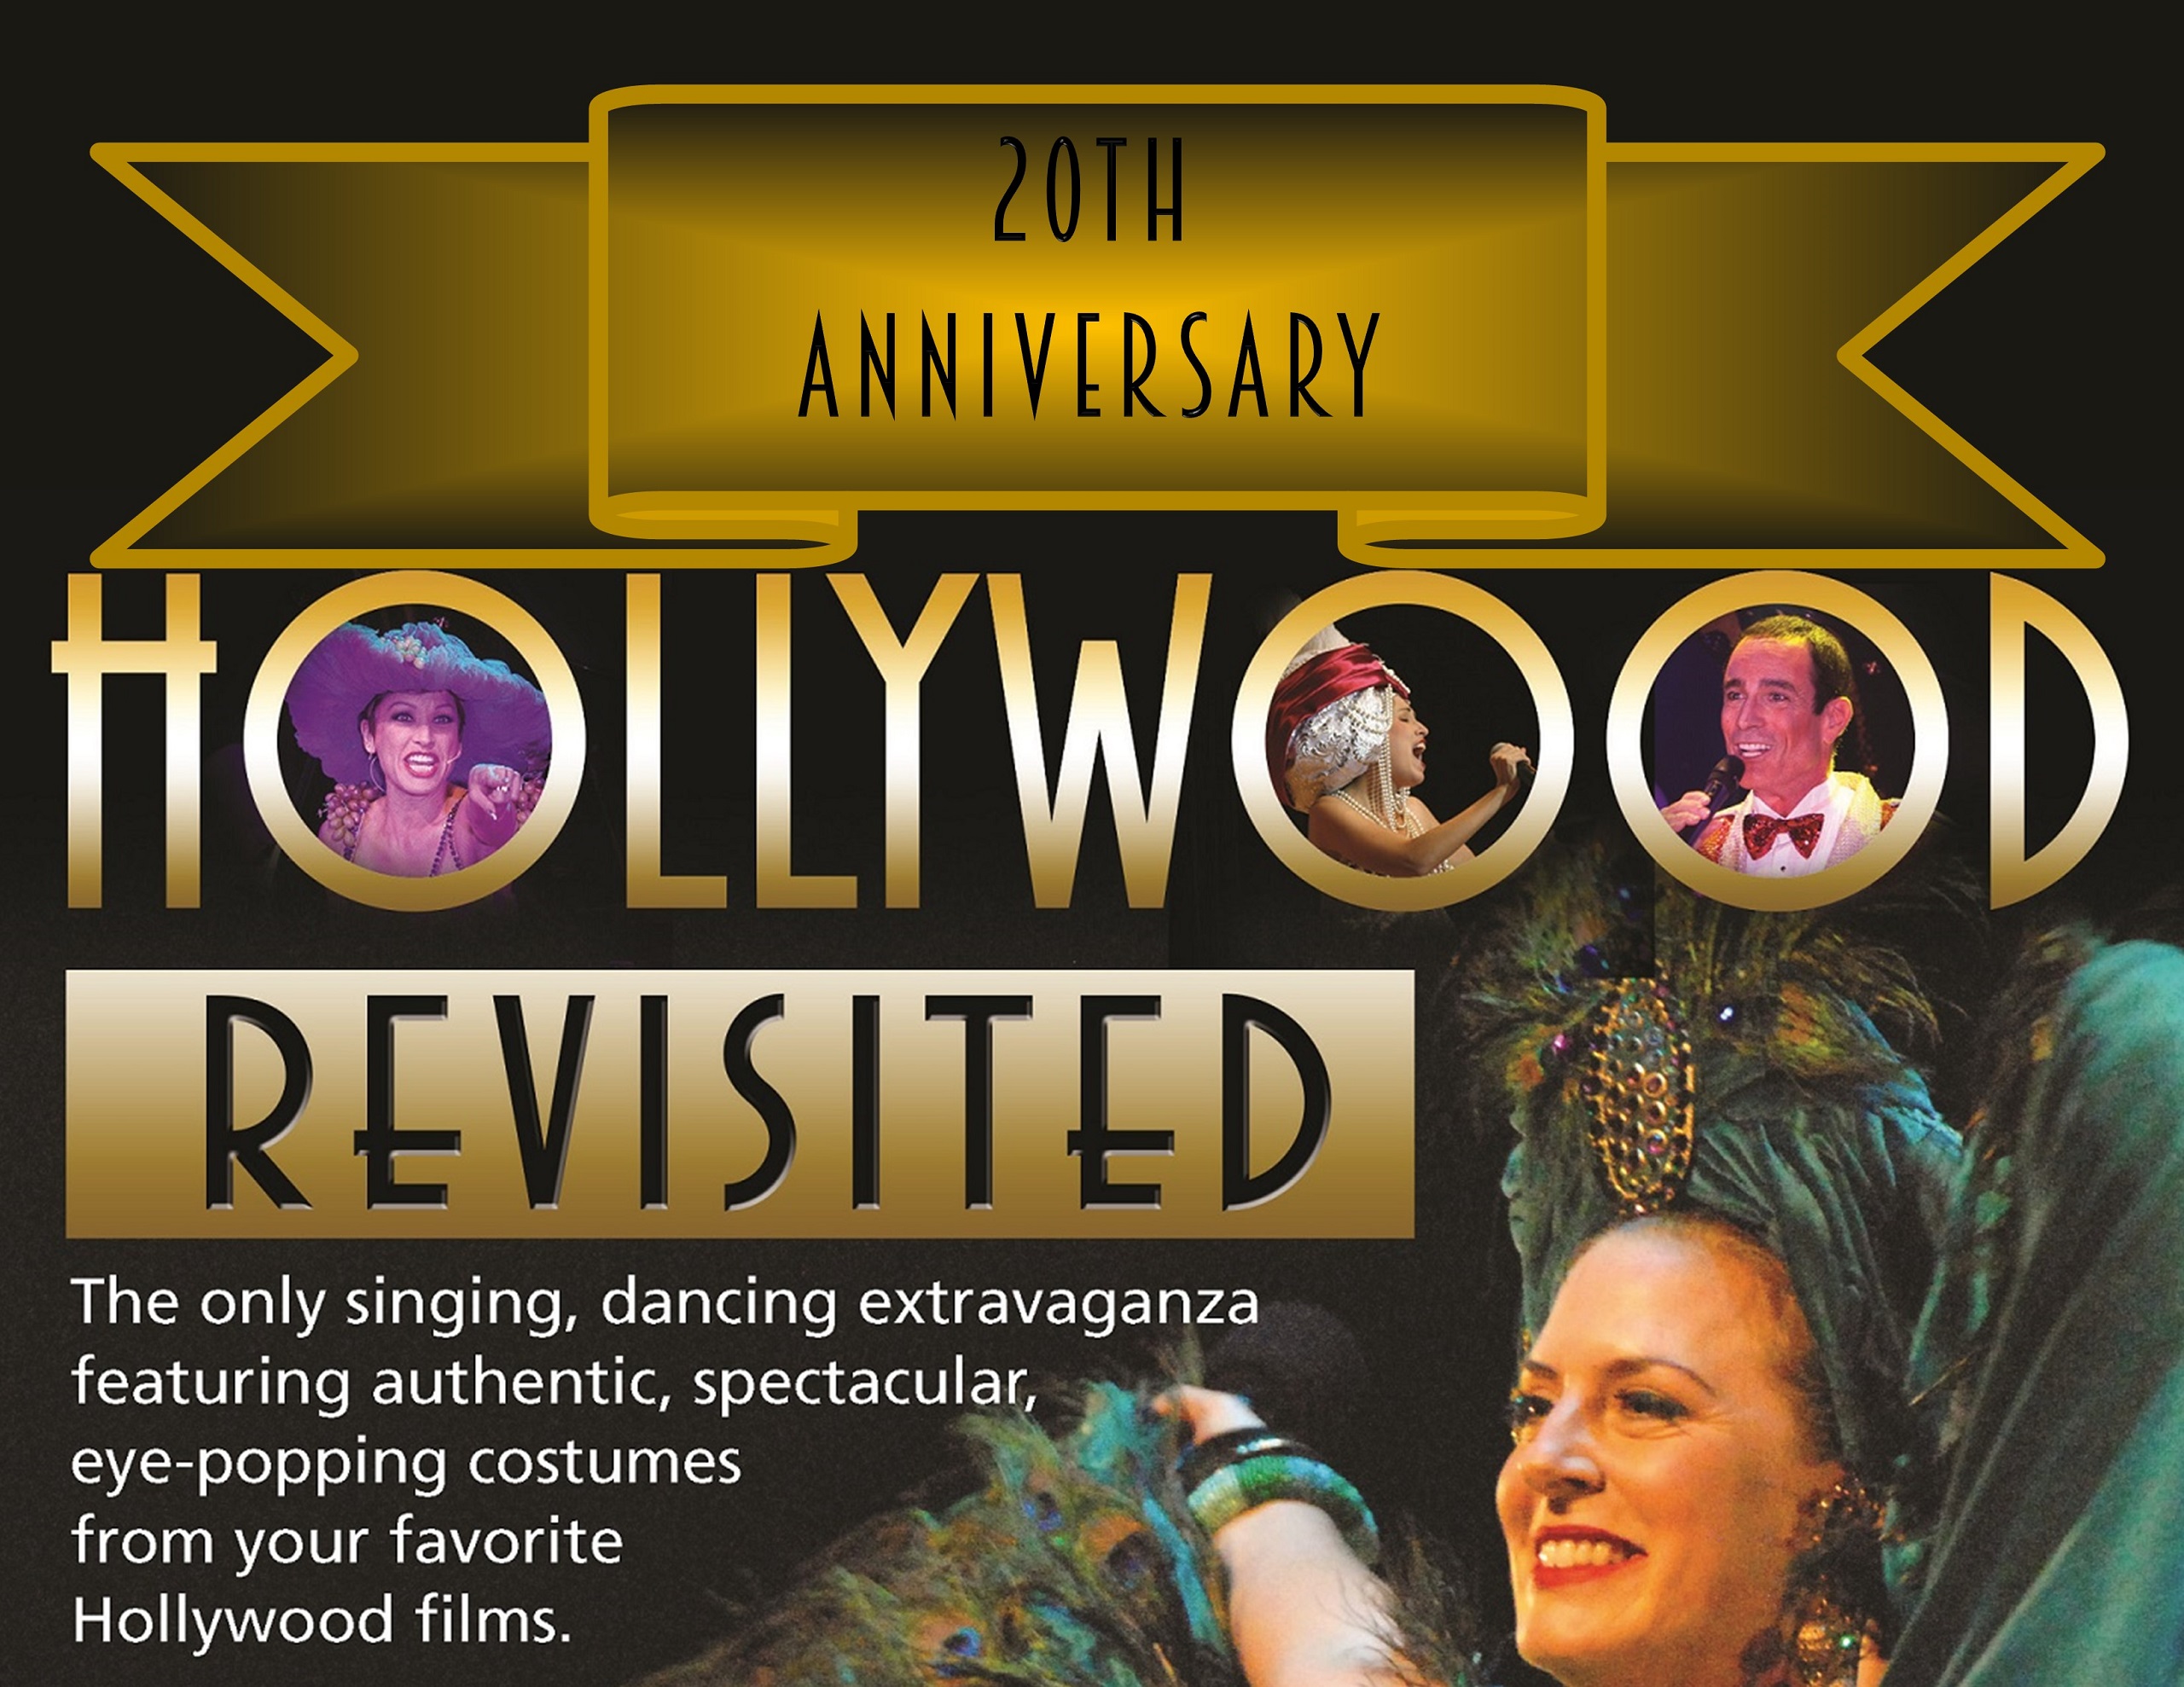 Joshua is the director, choreographer and male performer in this one of a kind, Hollywood Musical Revue in which the performers perform in the ORIGINAL Costumes ACtUALLY worn by the legendary stars in the classic films of Old Hollywood